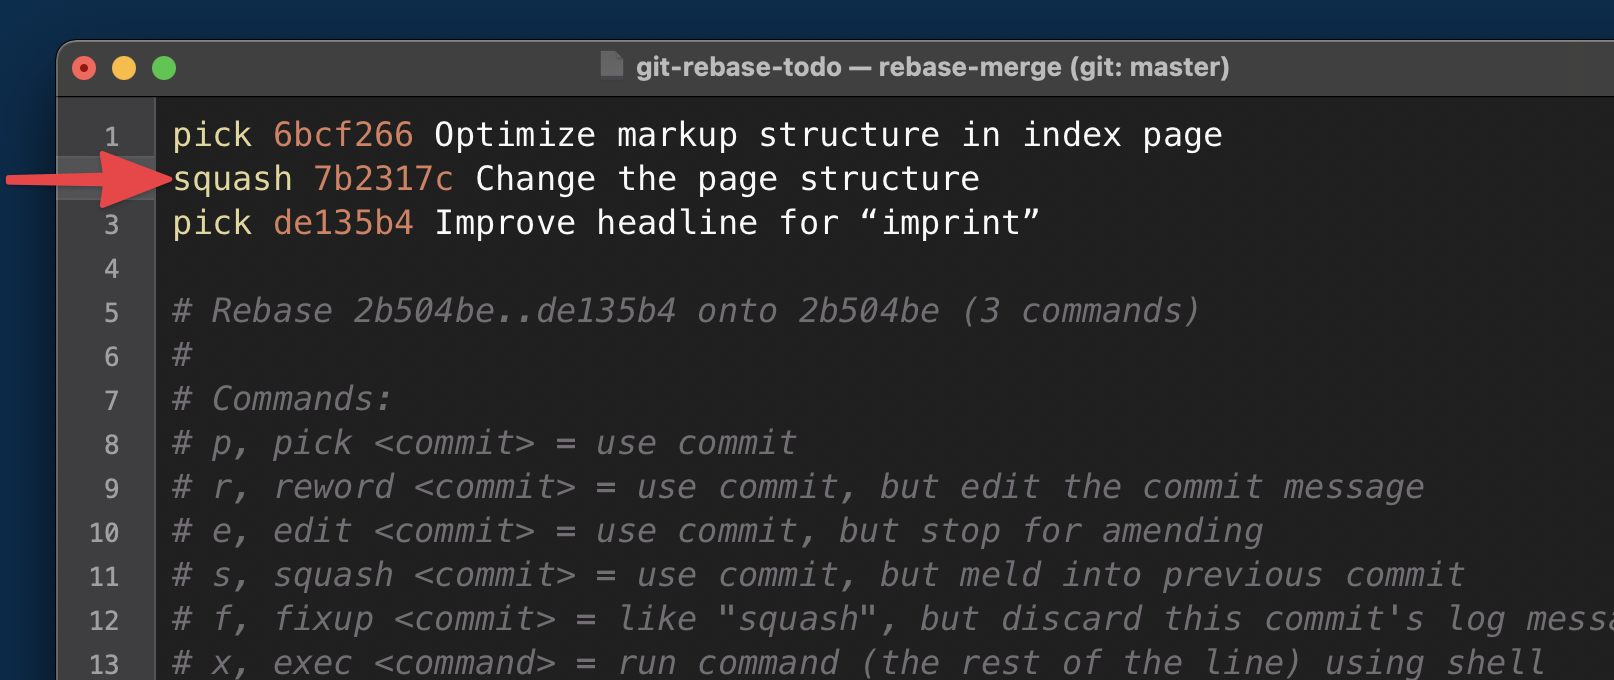 The editor window containing our range of commits